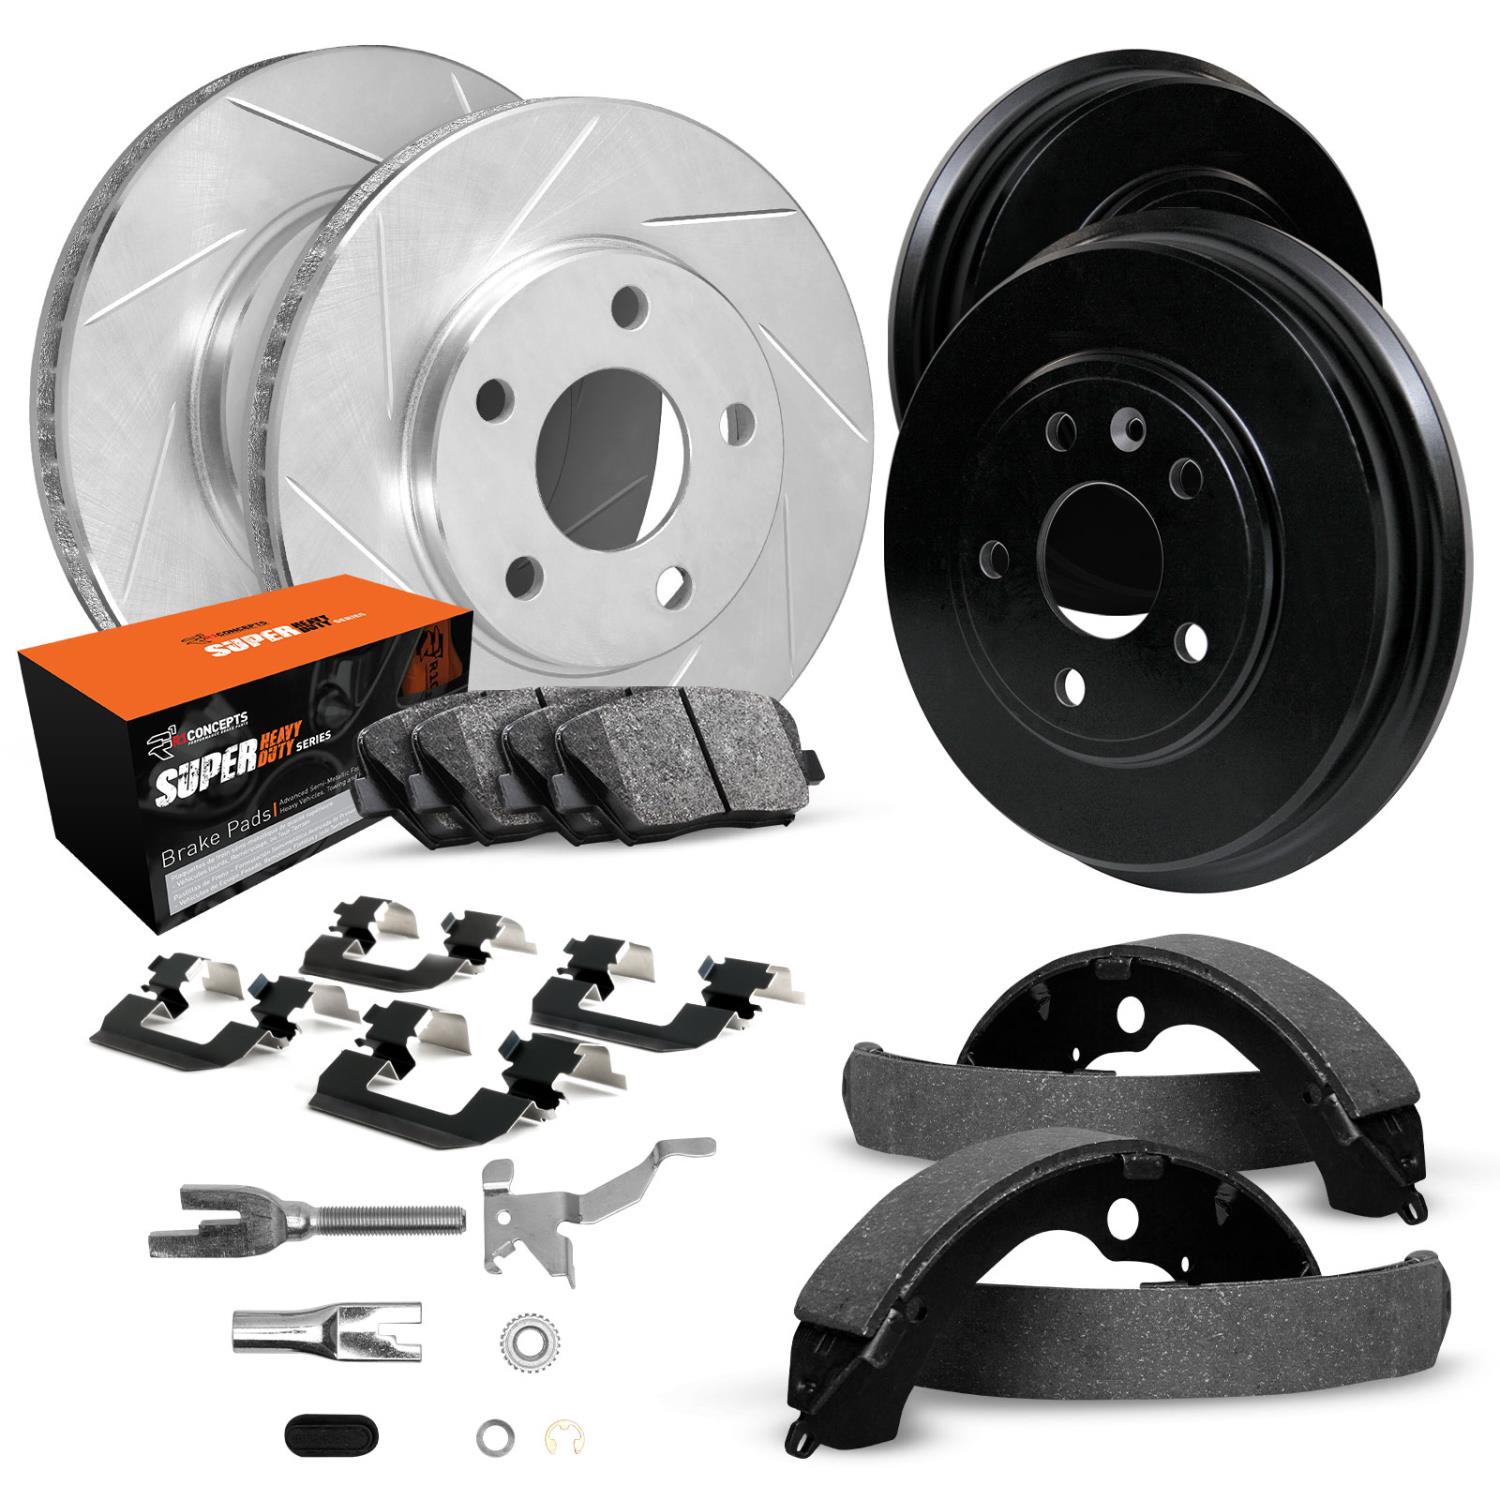 E-Line Slotted Silver Rotor & Drum Set w/Super-Duty Pads, Shoes/Hardware/Adjusters, 1999-2003 Ford/Lincoln/Mercury/Mazda